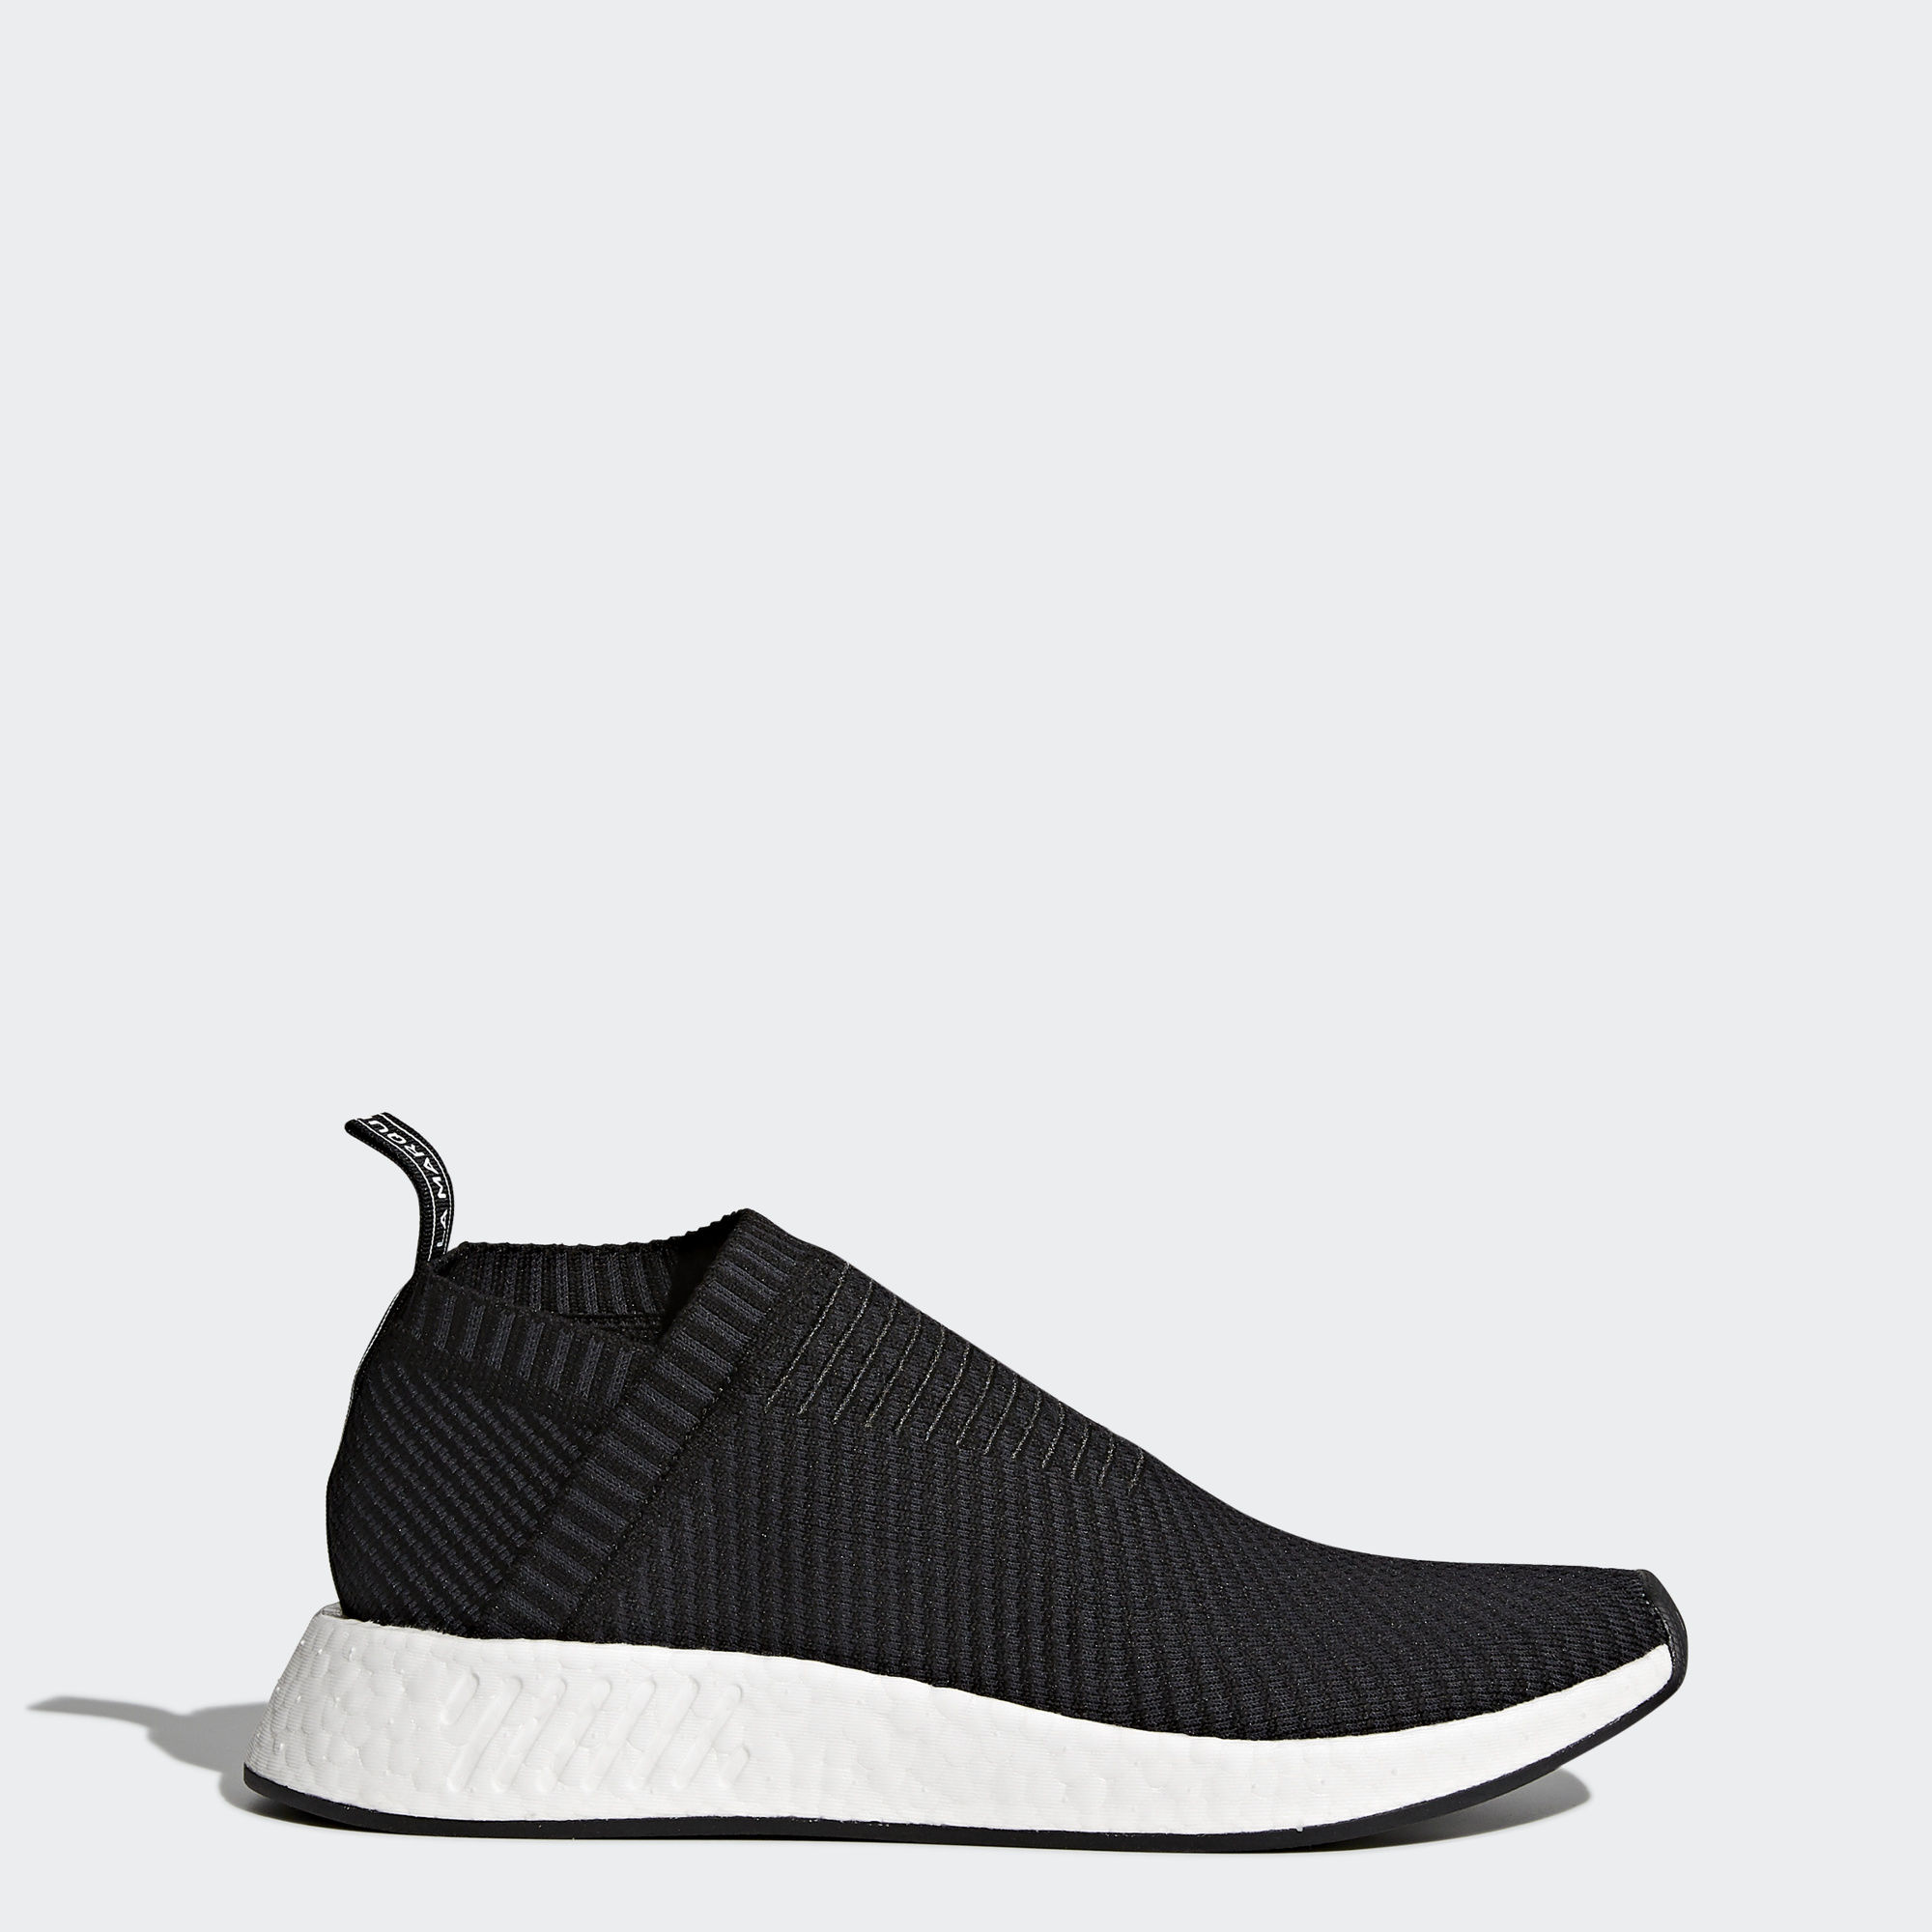 adidas nmd montant